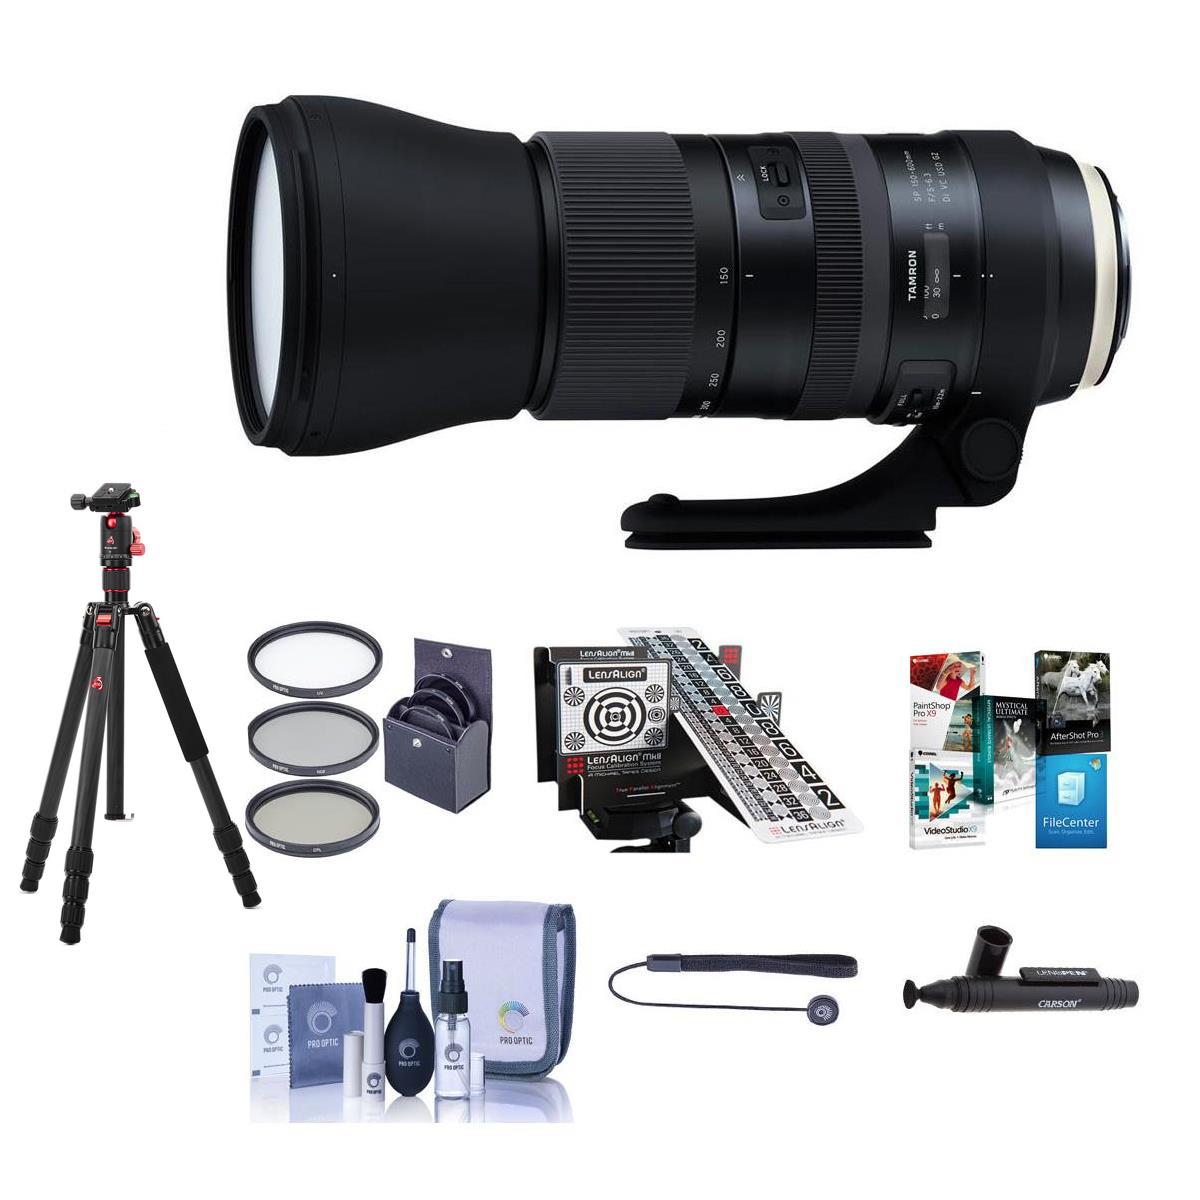 Tamron SP 150-600mm f/5-6.3 Di VC USD G2 Lens for Canon EF with Premium Acc Kit -  AFA022C-700 B